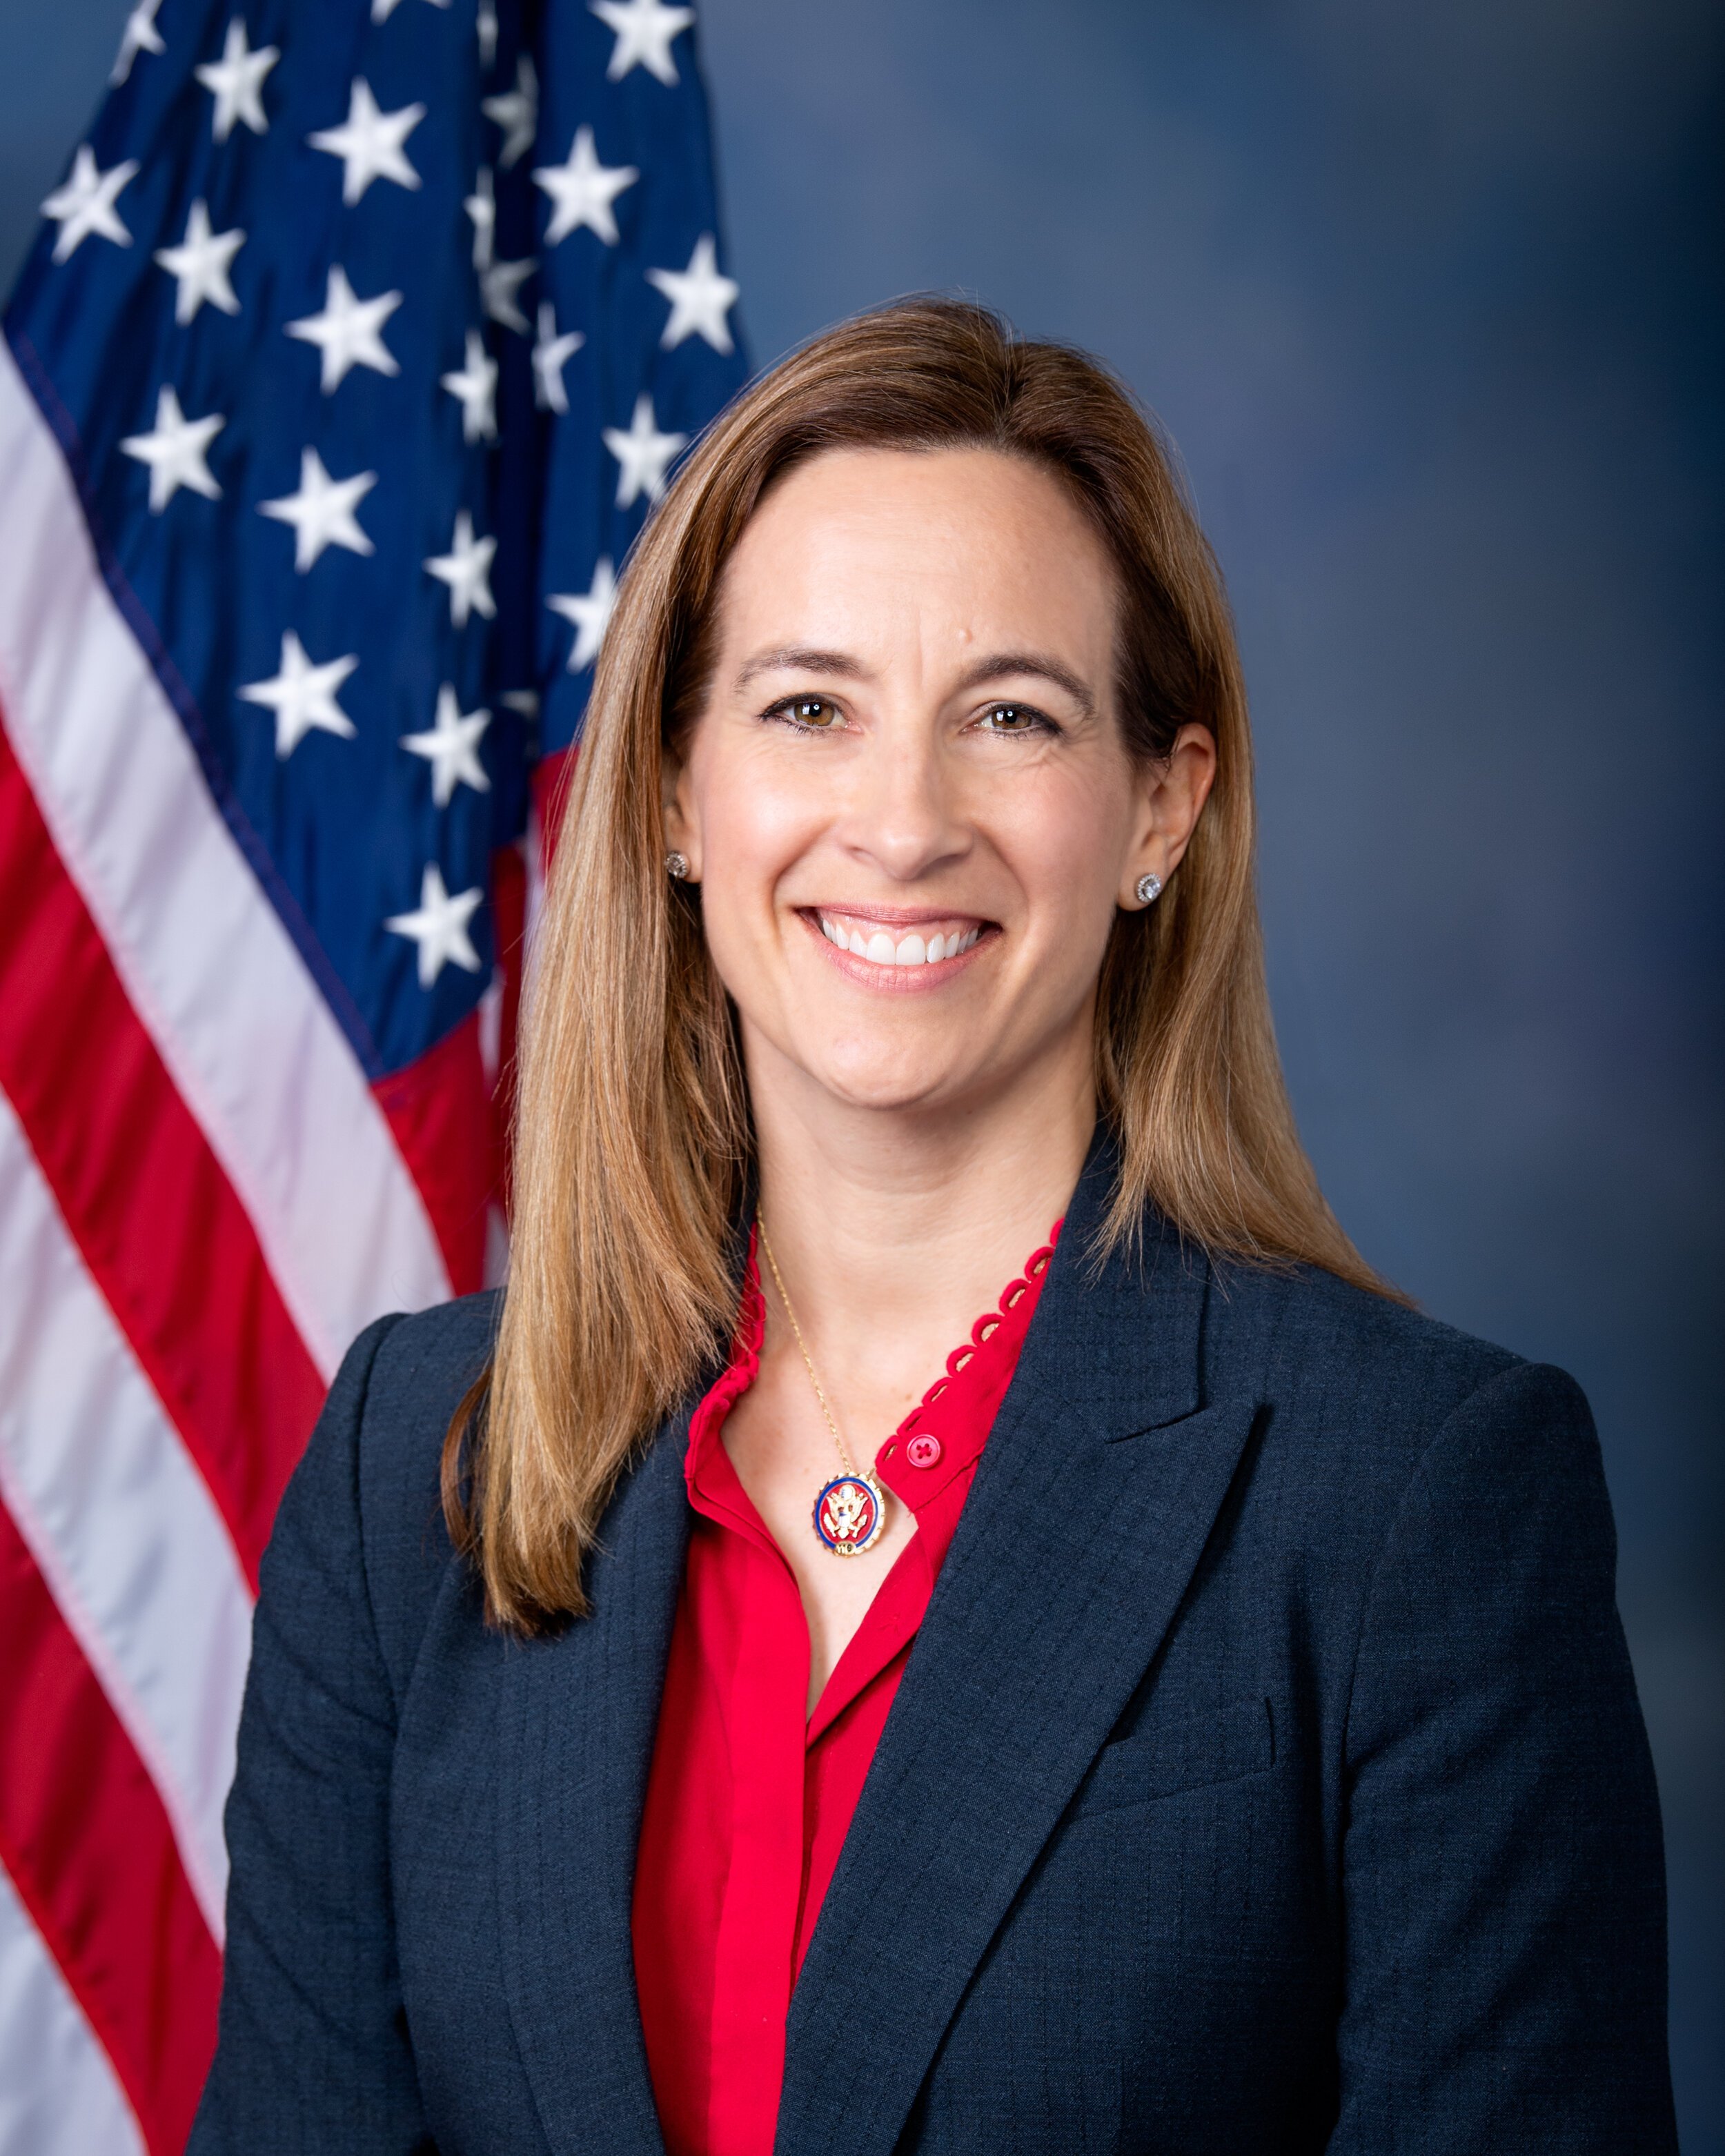 Mikie_Sherrill,_official_portrait,_116th_Congress_2.jpg